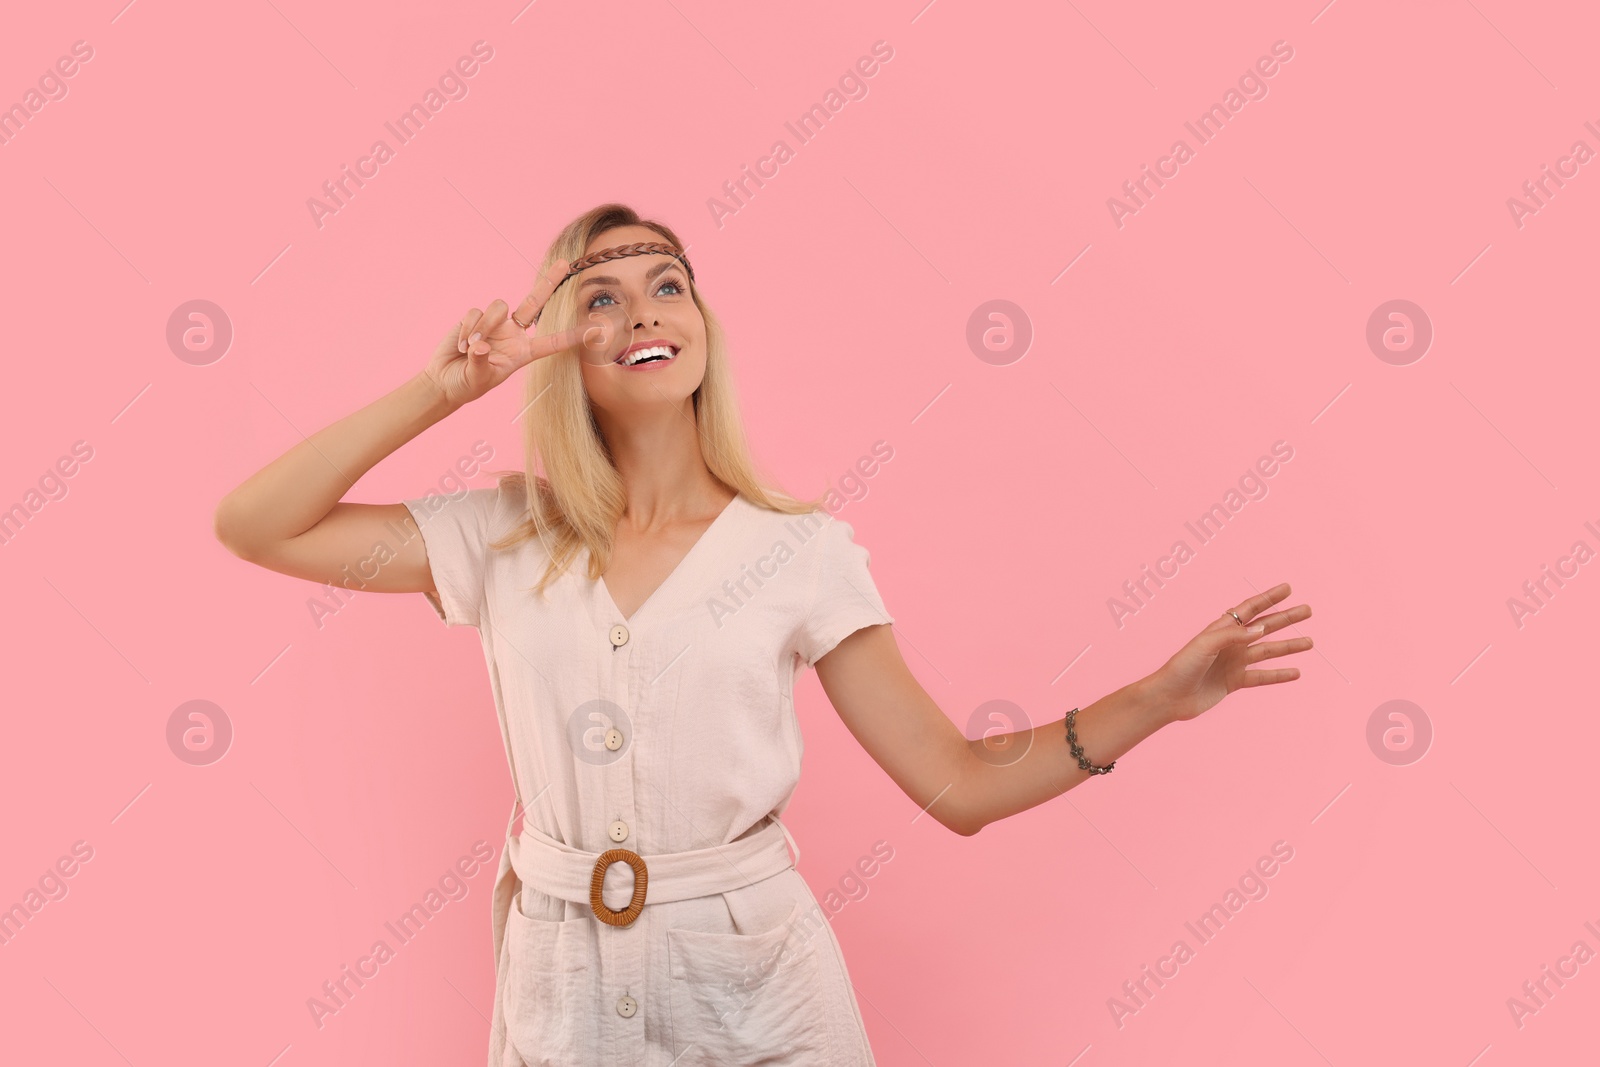 Photo of Portrait of smiling hippie woman showing peace sign on pink background